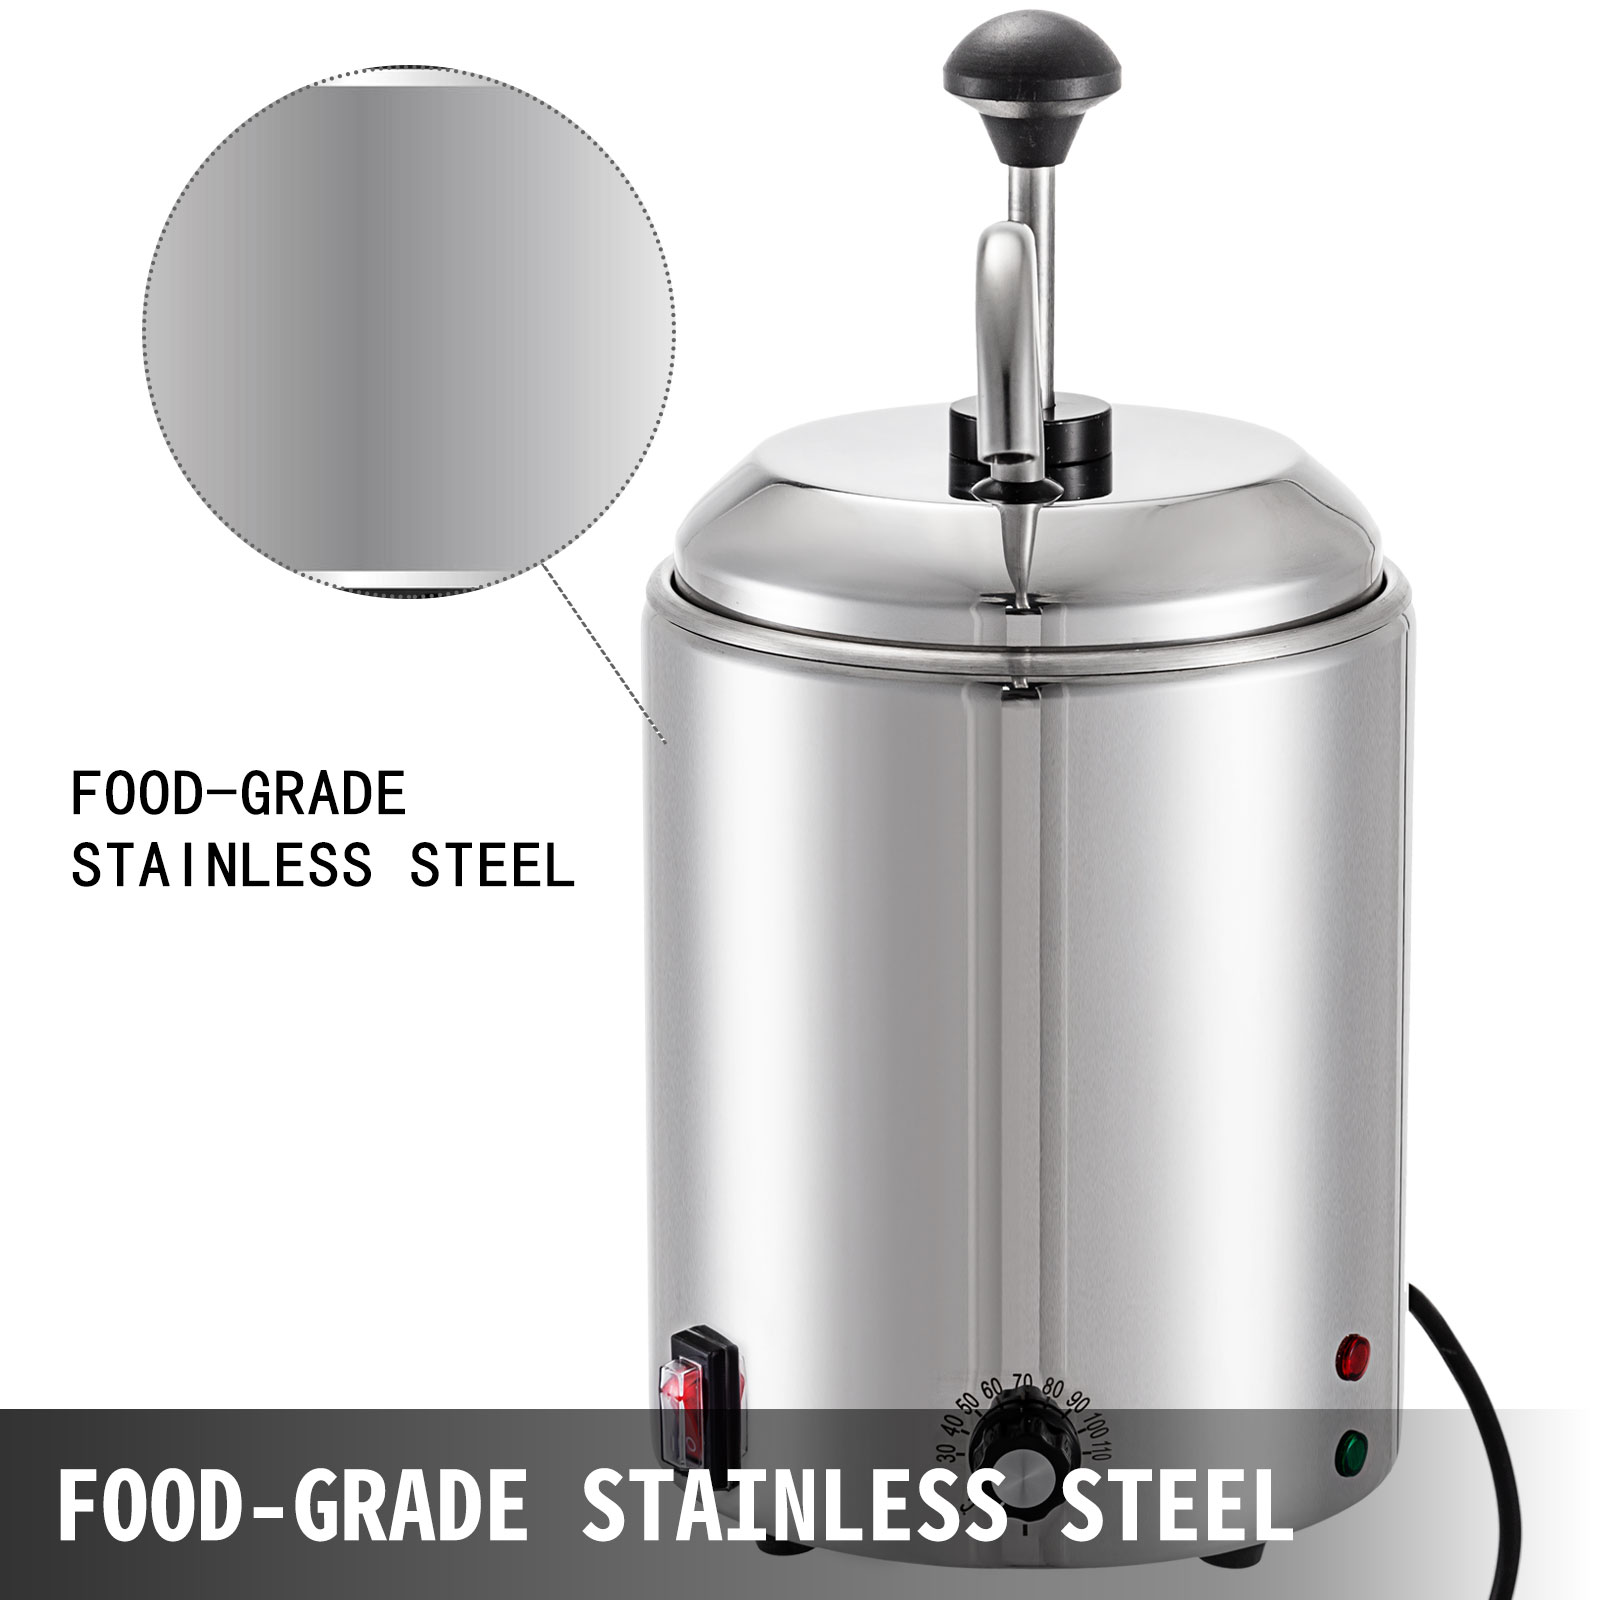 VEVOR Cheese Dispenser with Pump 2.4 qt. Capacity Cheese Warmer Stainless Steel Hot Fudge Warmer 650W Cheese Dispenser